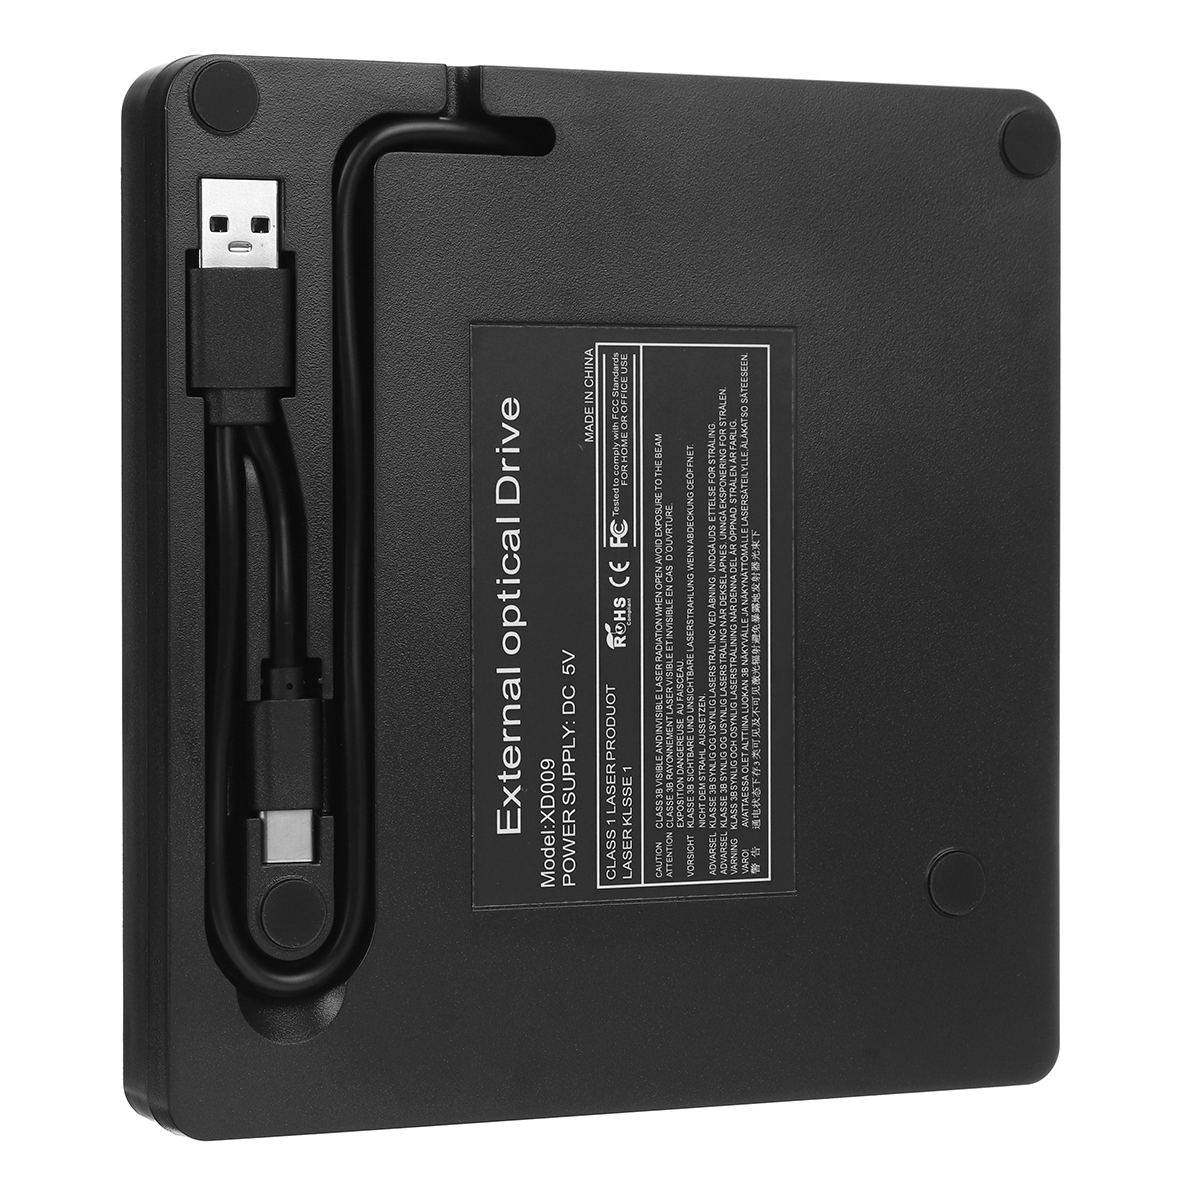 Find USB 3 0 Type C External Optical Drive DVD RW Player CD DVD Burner Writer Rewriter Data Transfer for PC Laptop OS Windows 7/8/10 for Sale on Gipsybee.com with cryptocurrencies